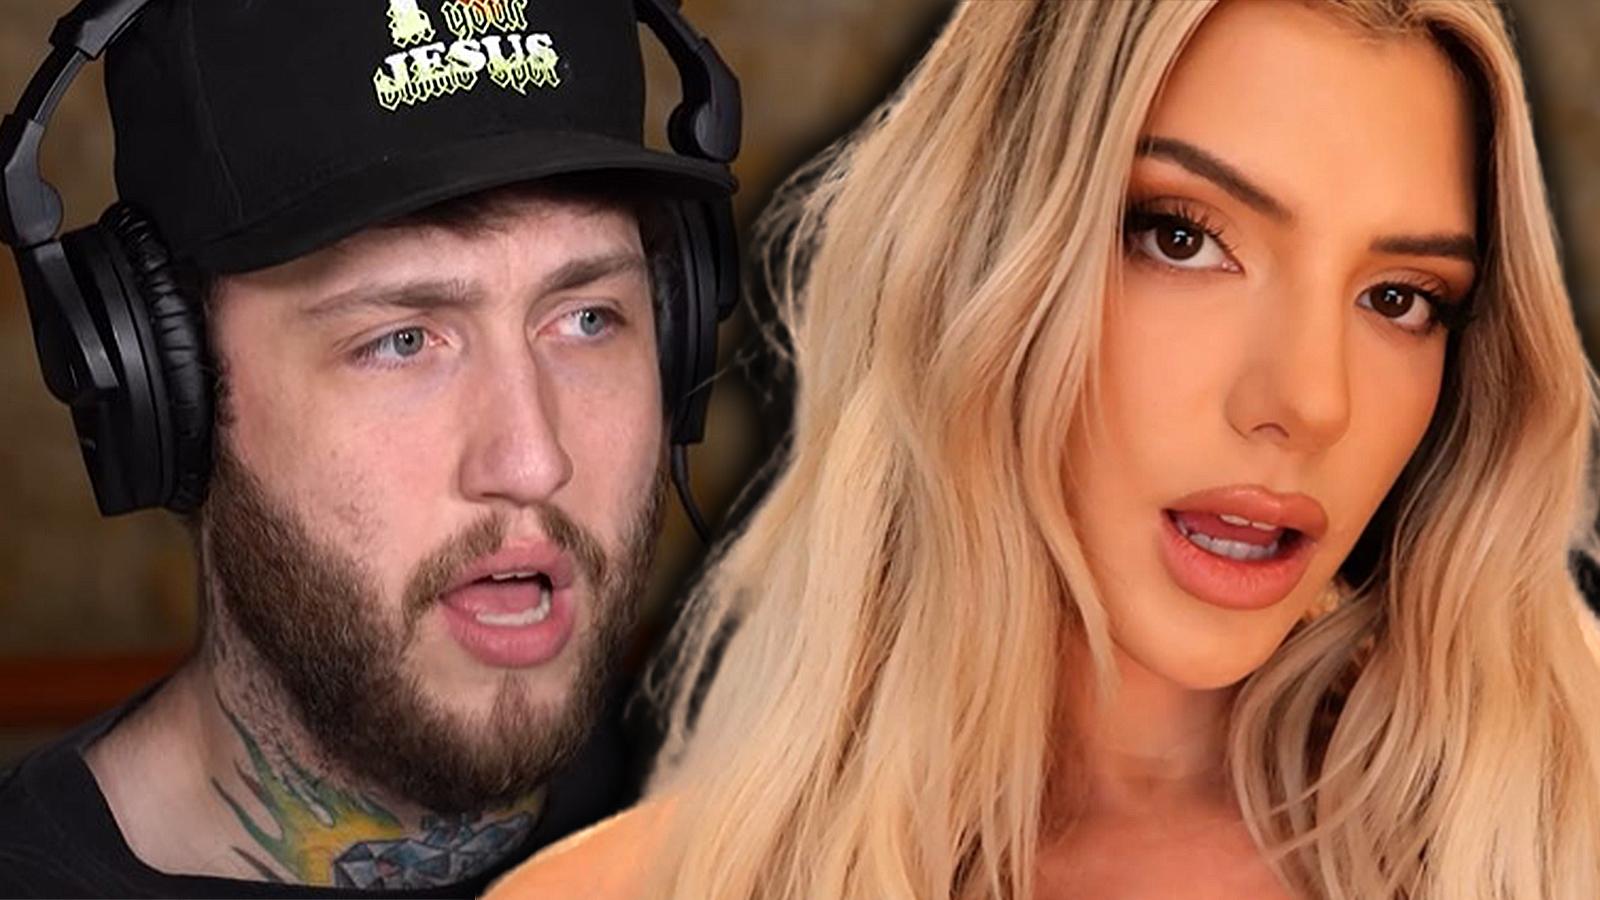 FaZe Banks says he would never get back together with Alissa Violet